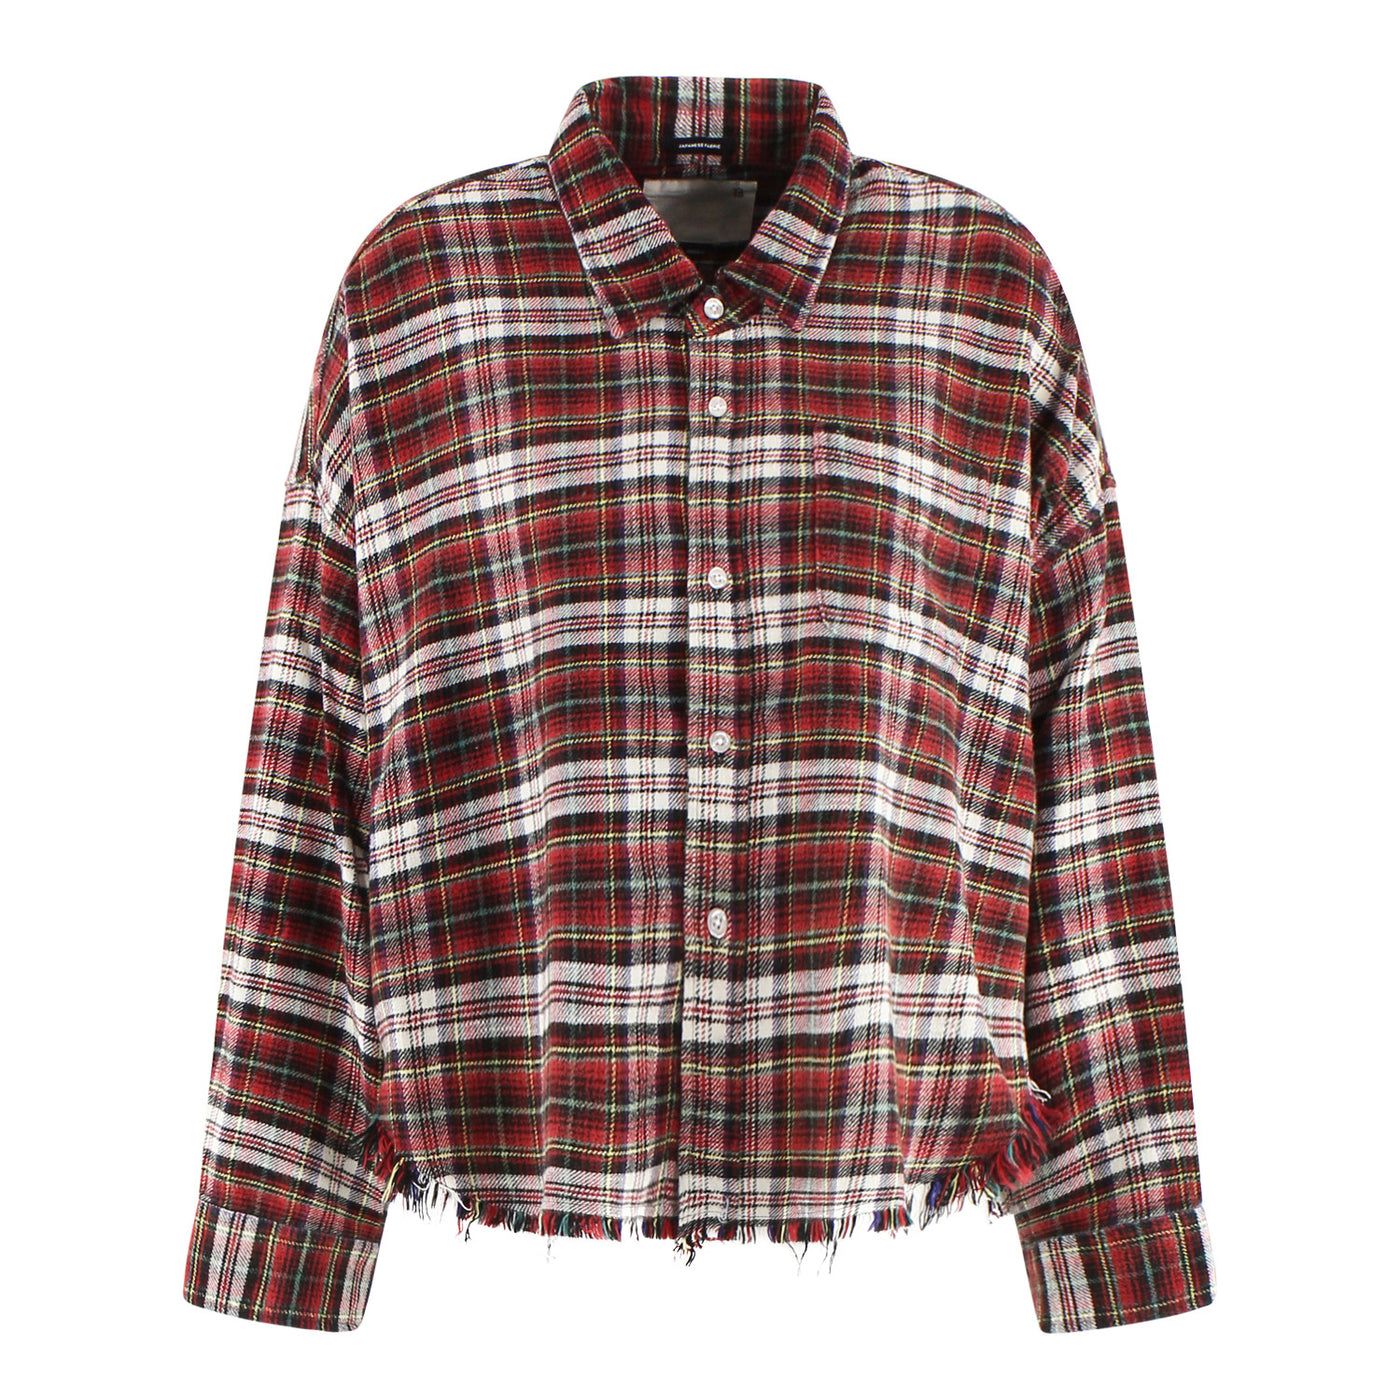 Bluse aus Flanell